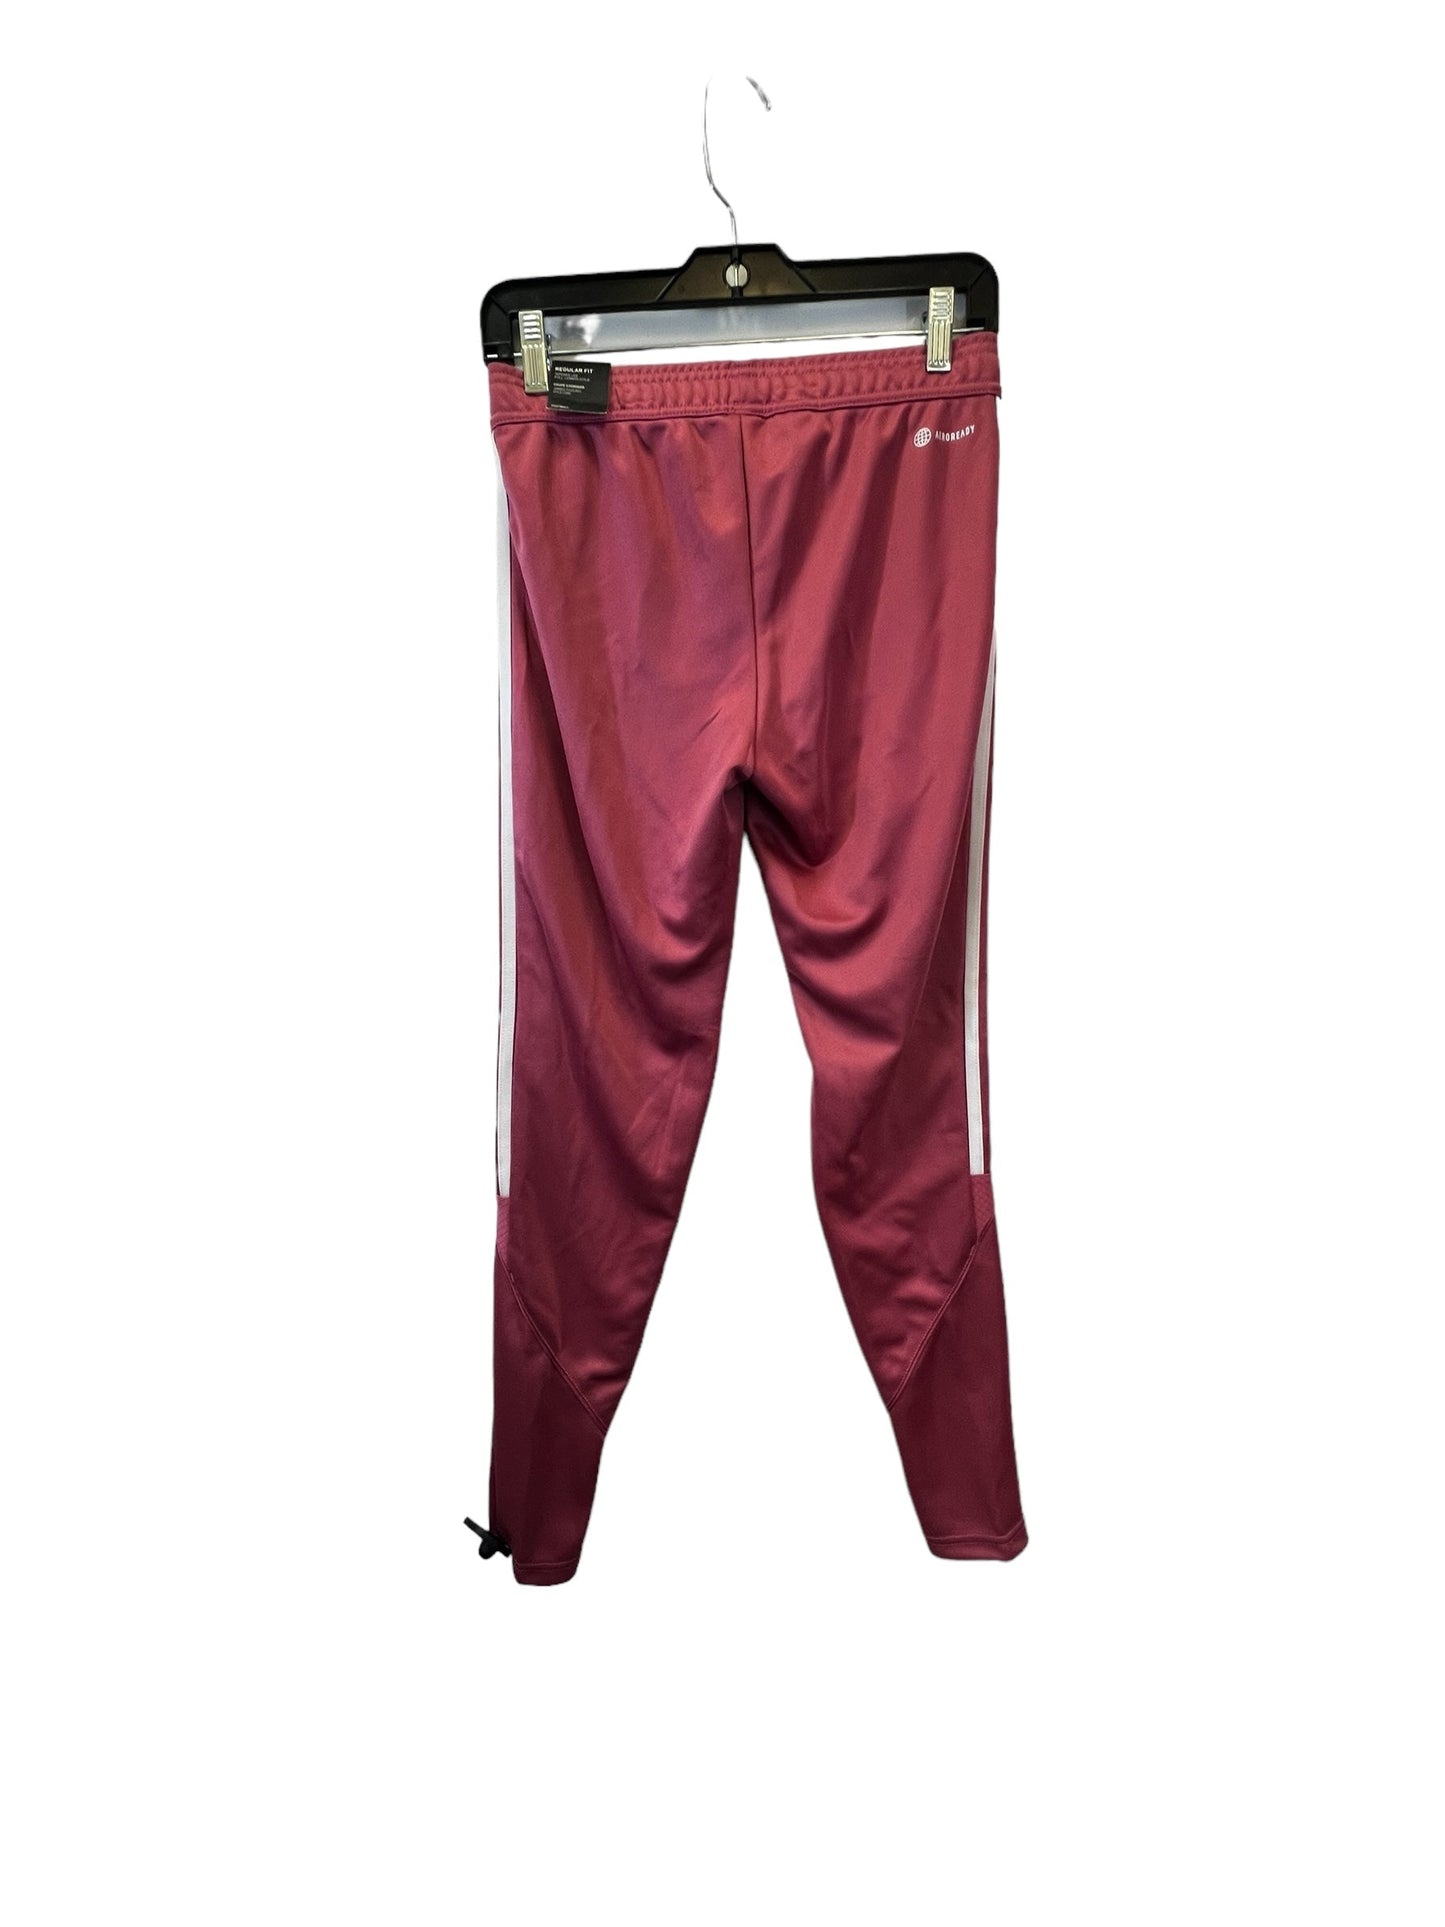 Pink Athletic Pants Adidas, Size Xs